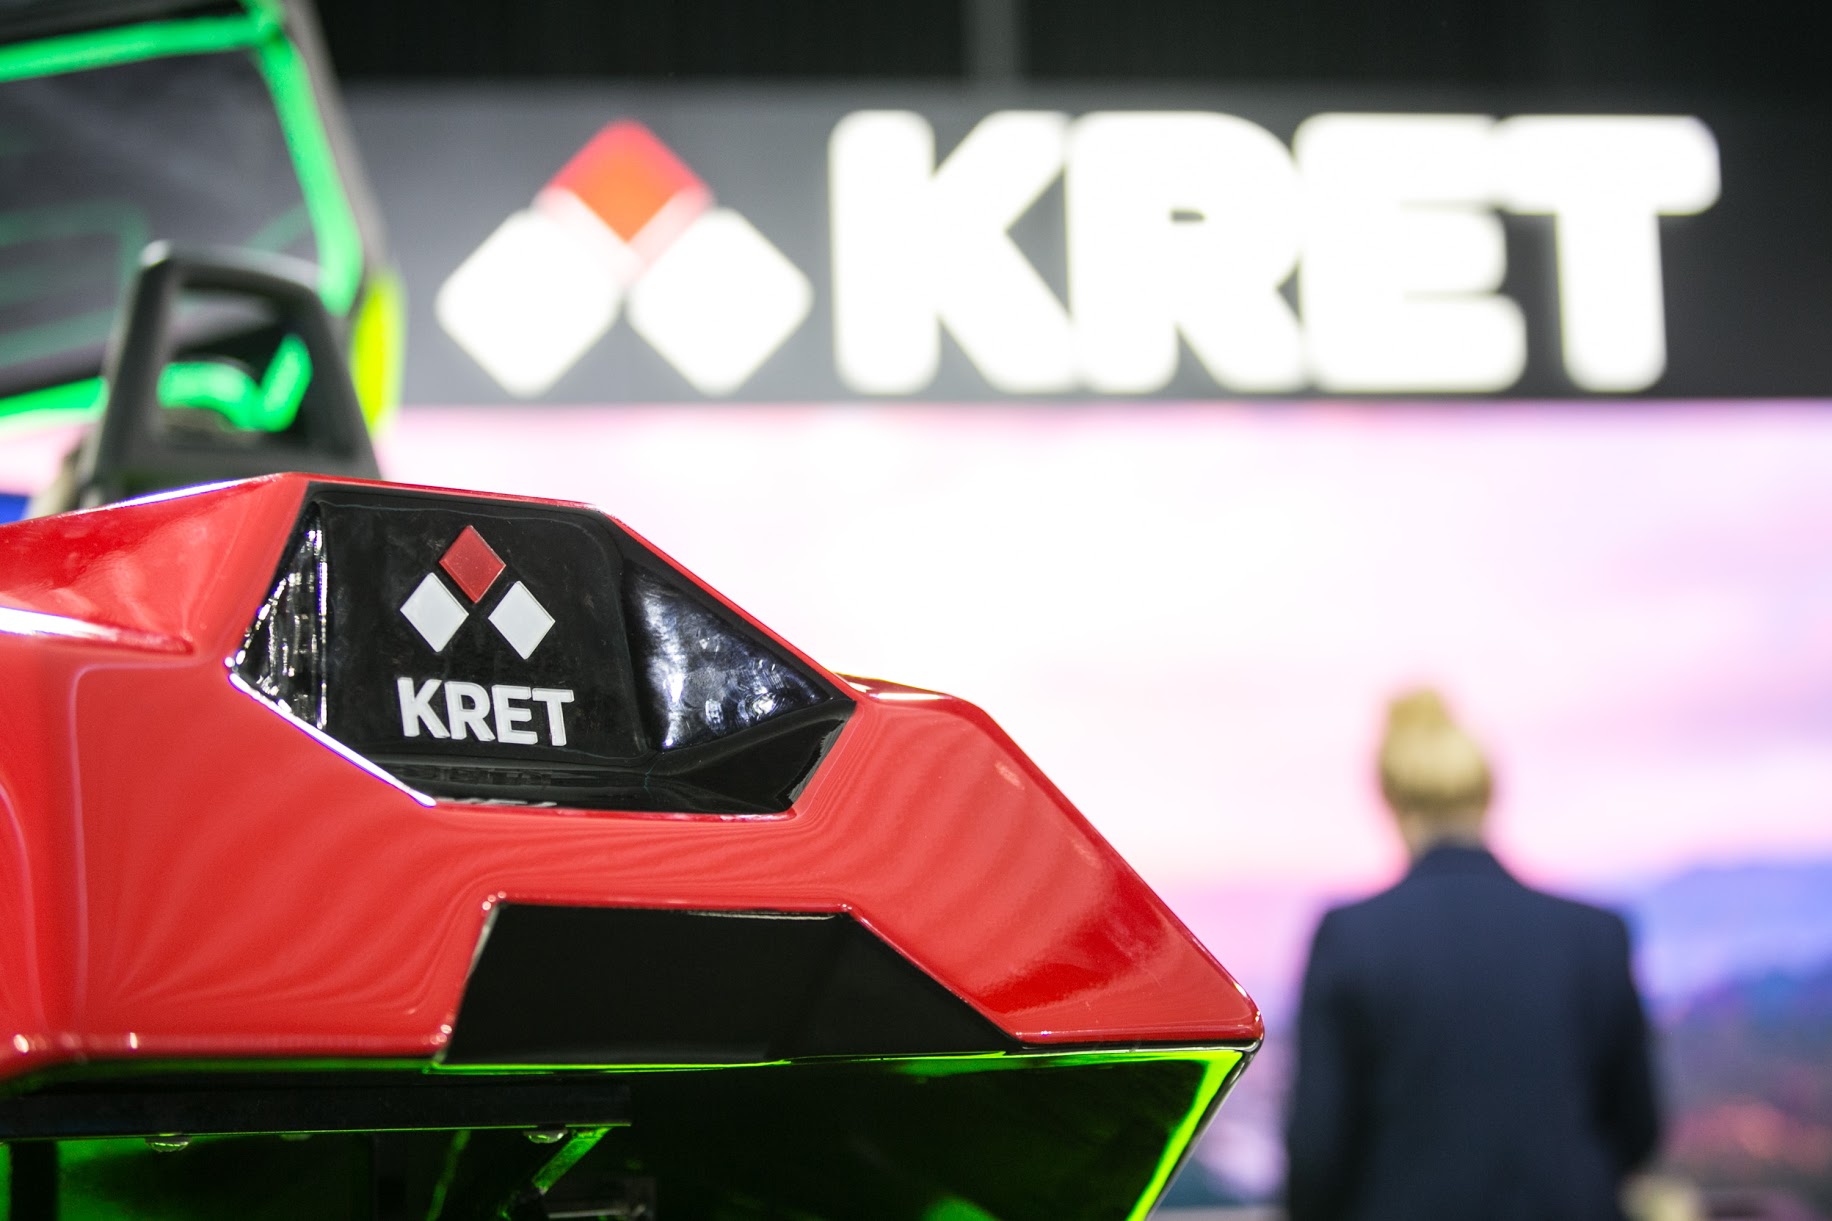 KRET has Presented a Console for Advanced Helicopters